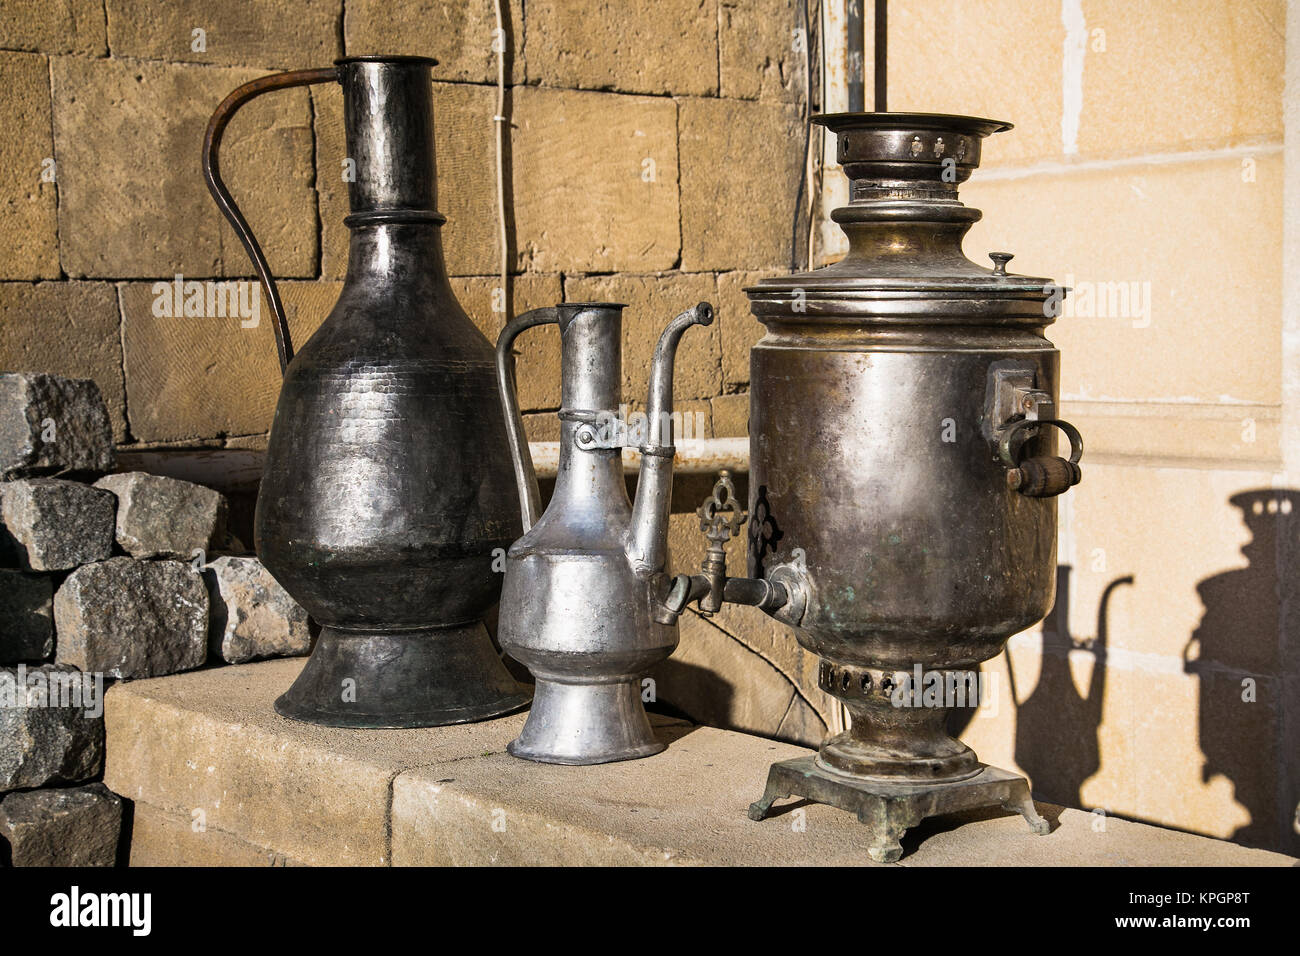 Old oriental antiques barass jungs and vases on street market in Baku, Azerbeijan. Stock Photo